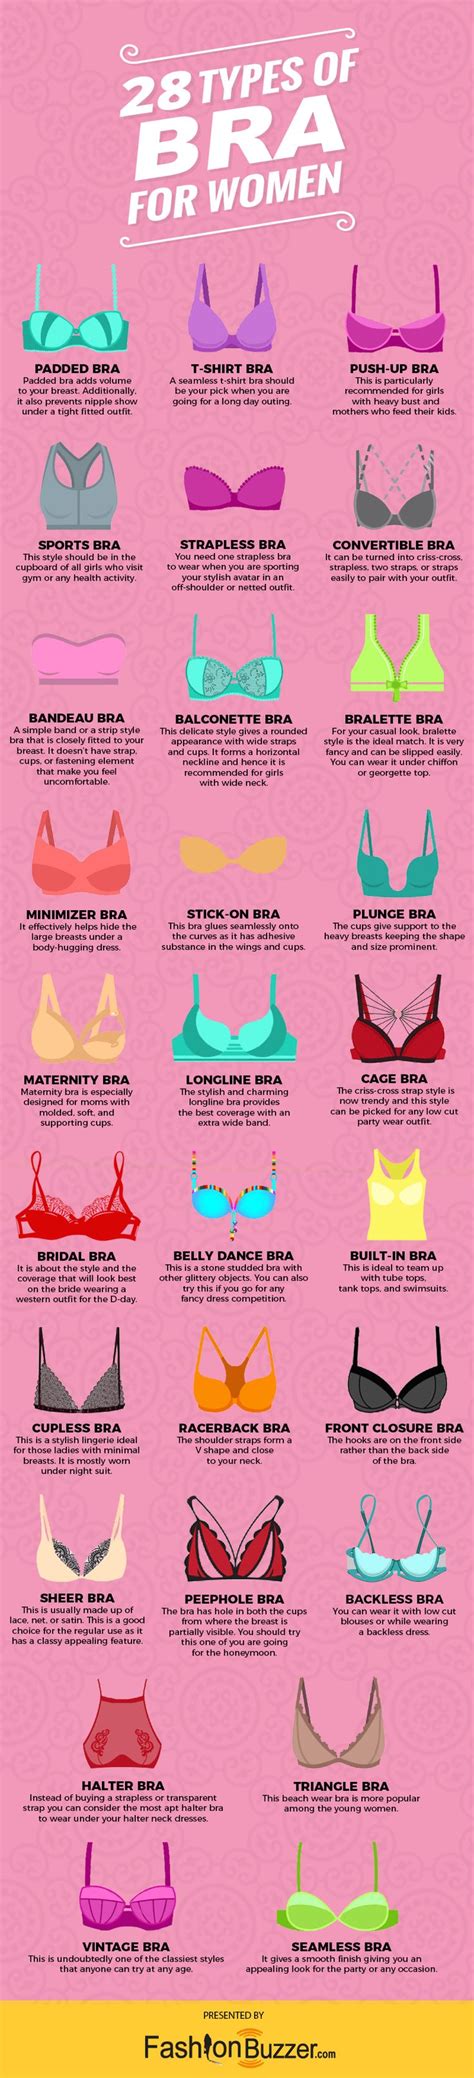 The Bras For Women Are Shown In Different Colors And Sizes With Text